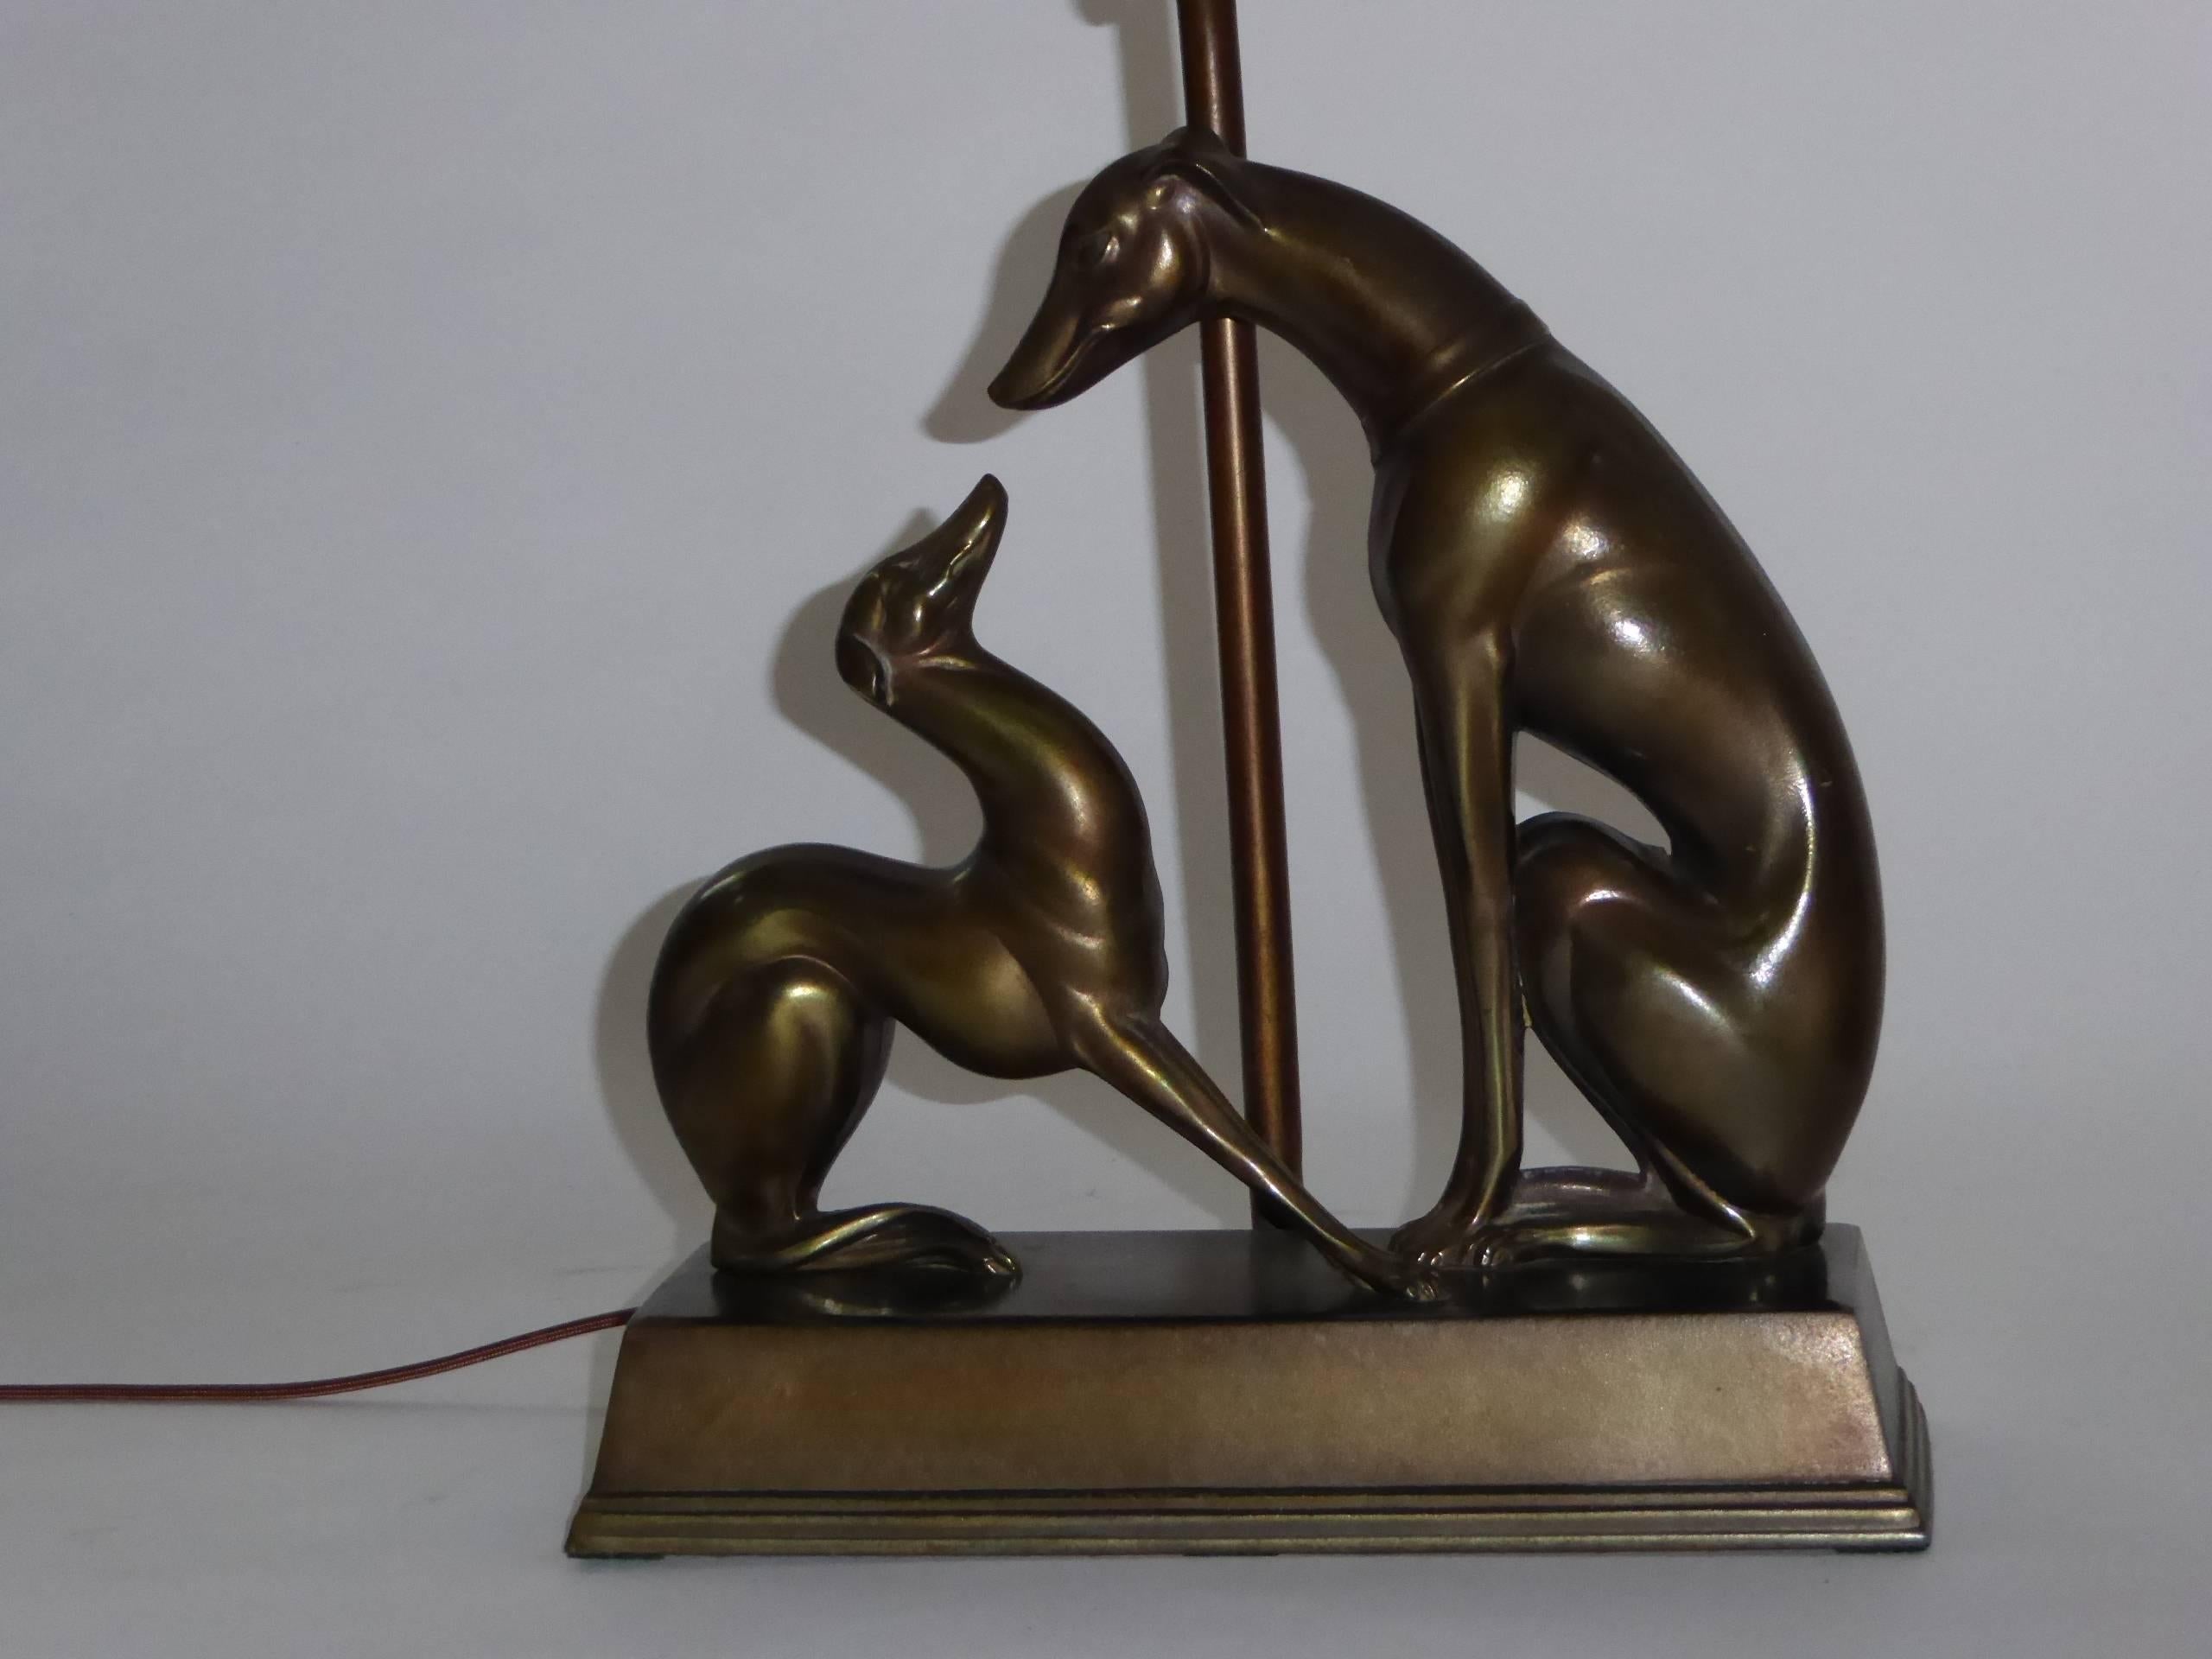 Whether they are Whippets or Greyhounds, these bronzed figural table lamps featuring a mother or father dog with a young pup seated on a rectangular stepped base are stunning. Stamped on the bottom May 8, 1933. All original including the finial,